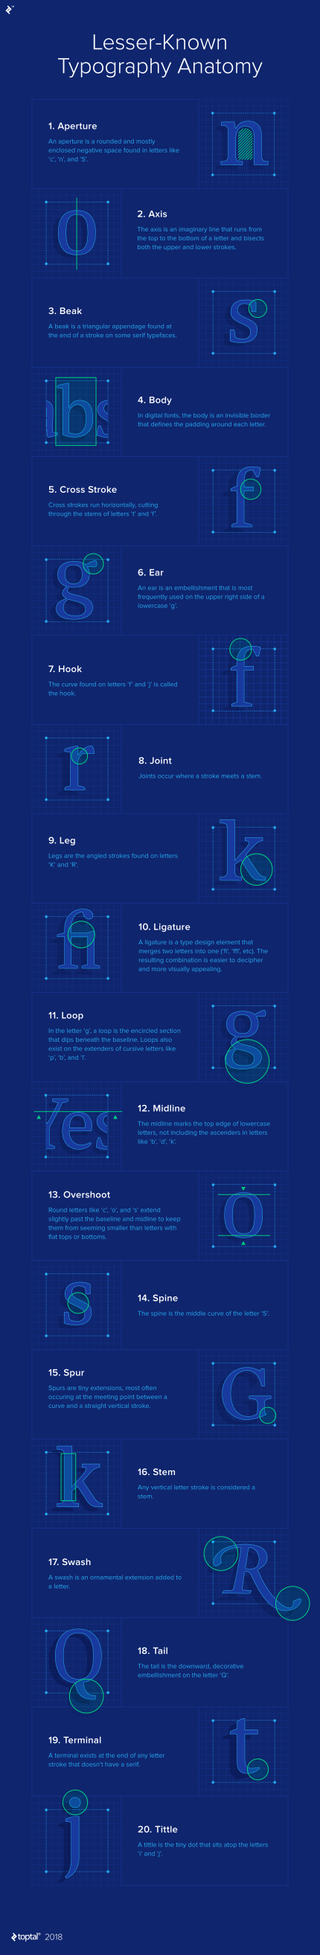 Lesser-known typography terms infographic